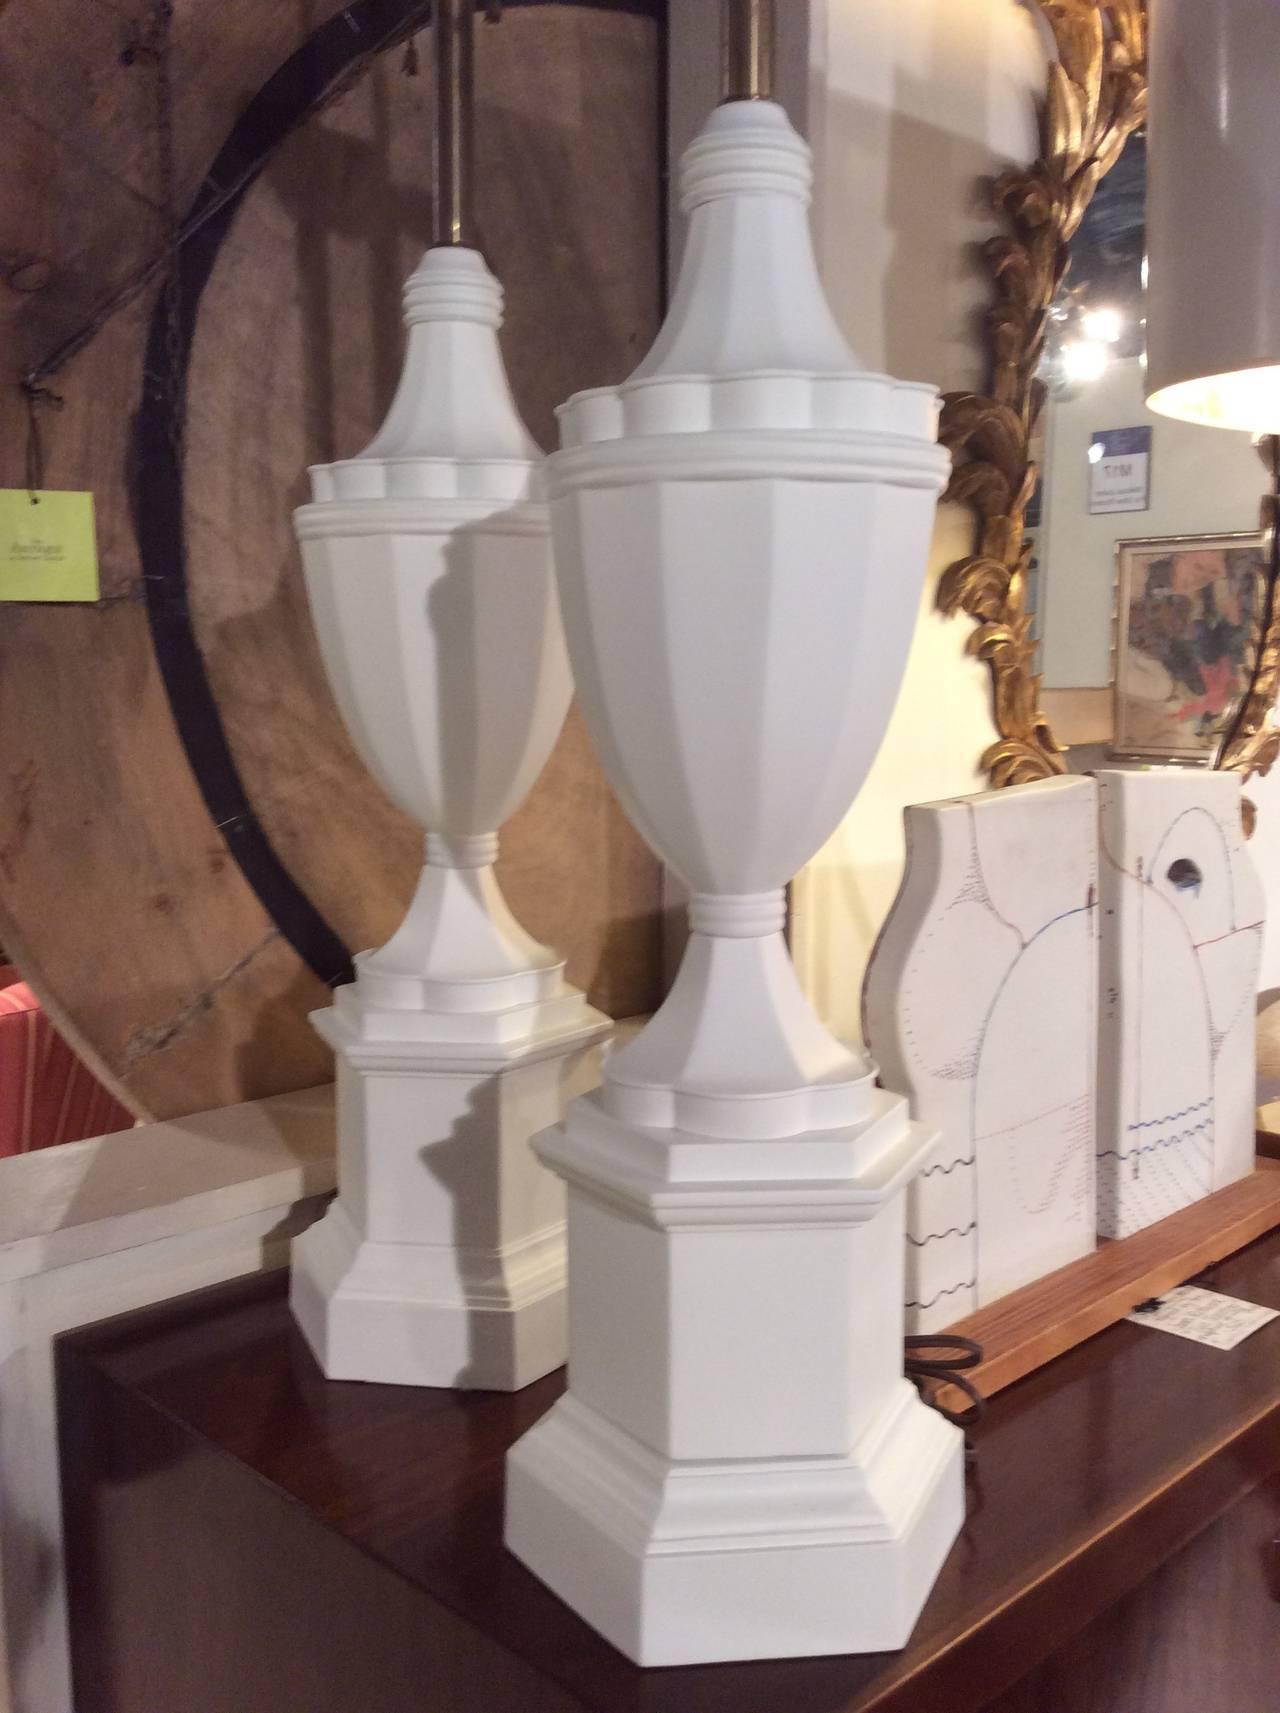 Manner of Serge Roche, John Dickinson or Sirmos fabulous plaster finish, vintage lamps. Tall and sculptural, a pair of vintage lamps with urns atop of a six-sided faceted base, finished in a matte plaster/gesso finish. Newly rewired and new set of